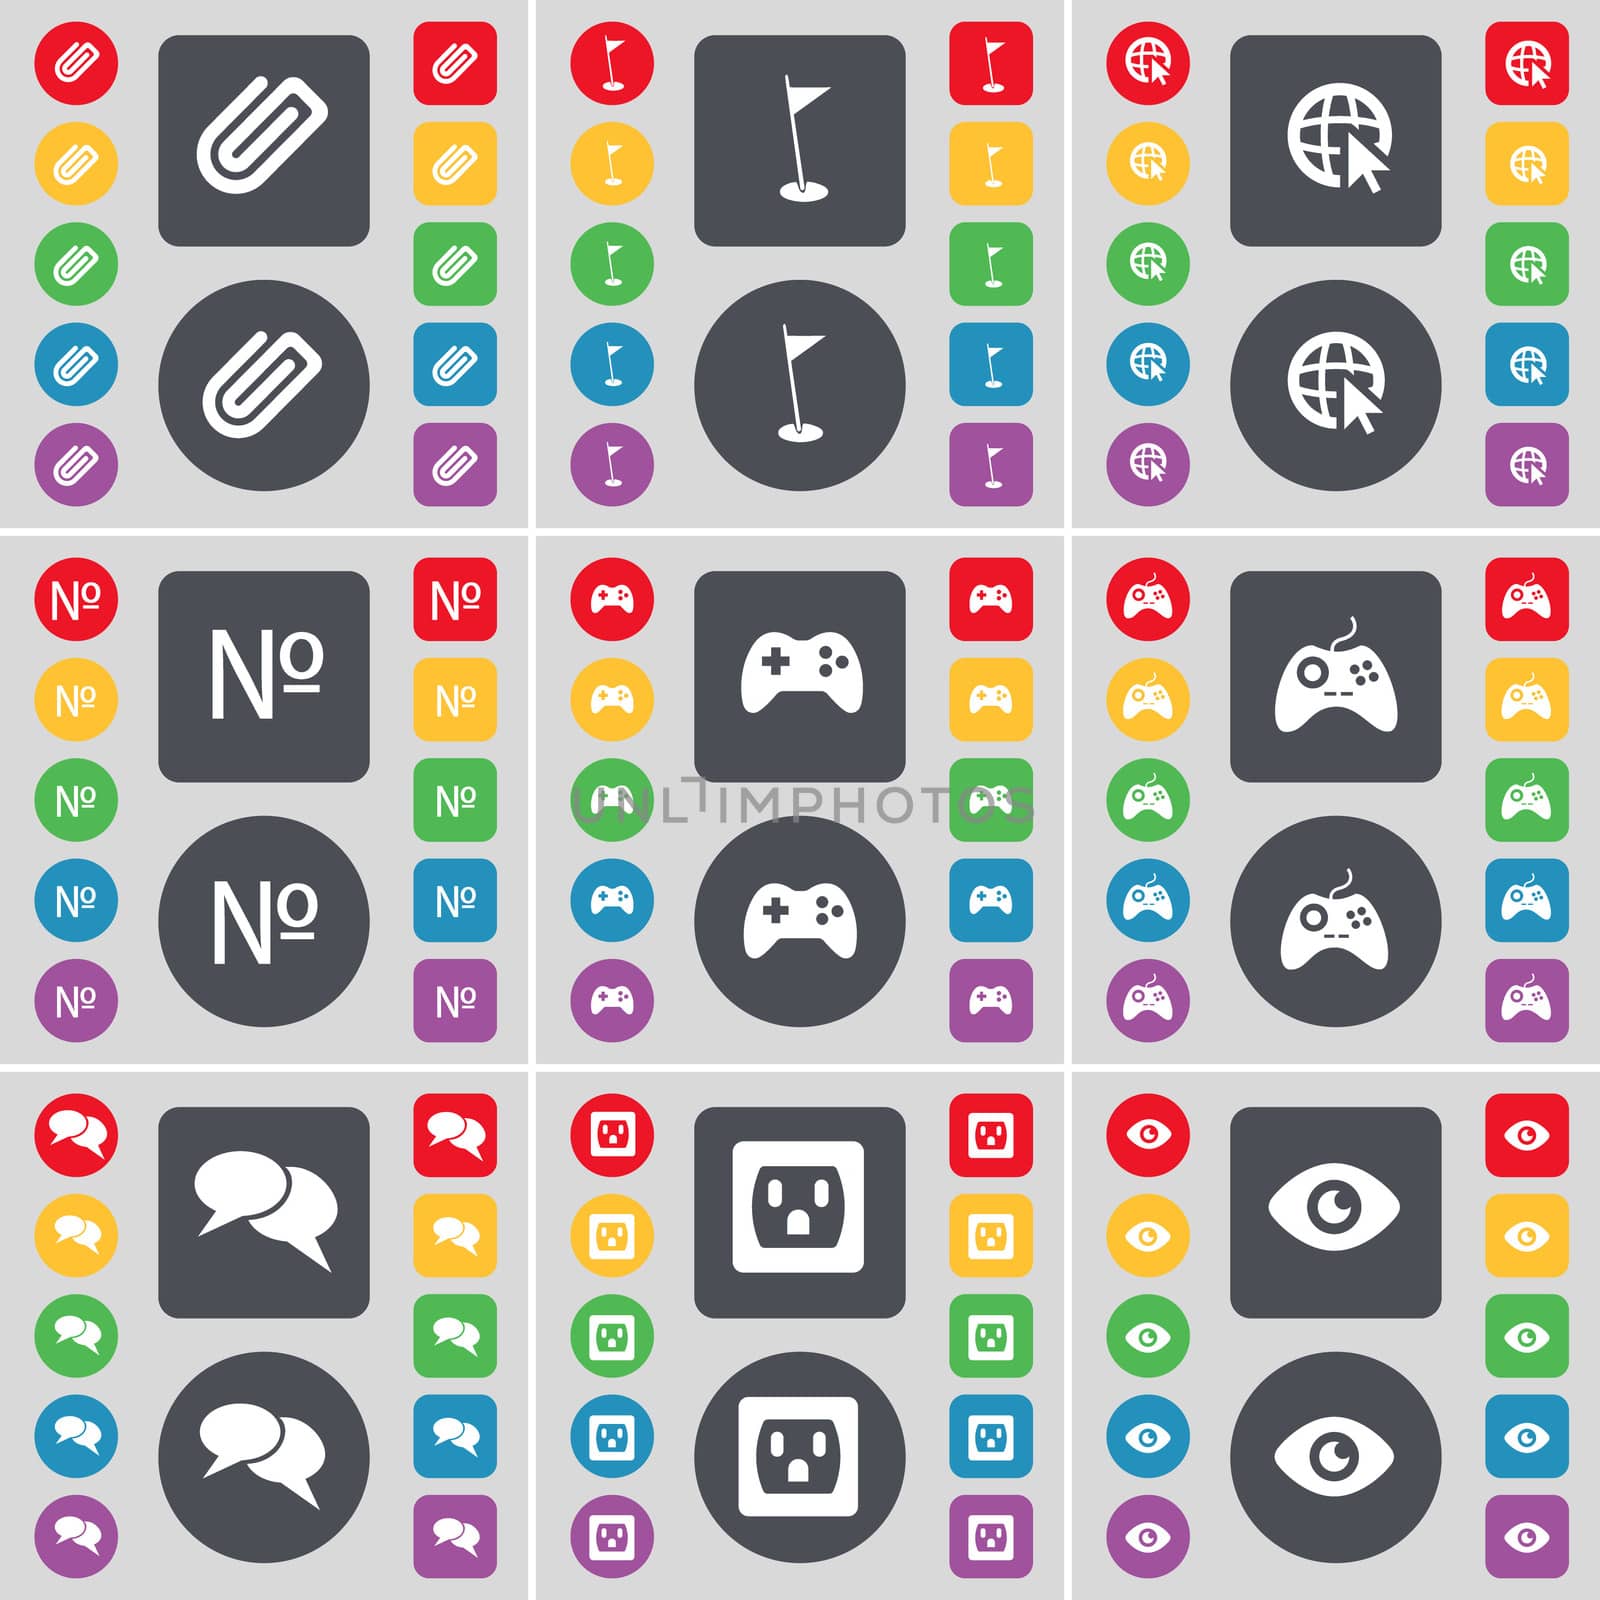 Clip, Golf hole, Web cursor, Number, Gamepad, Chat, Socket, Vision icon symbol. A large set of flat, colored buttons for your design. illustration